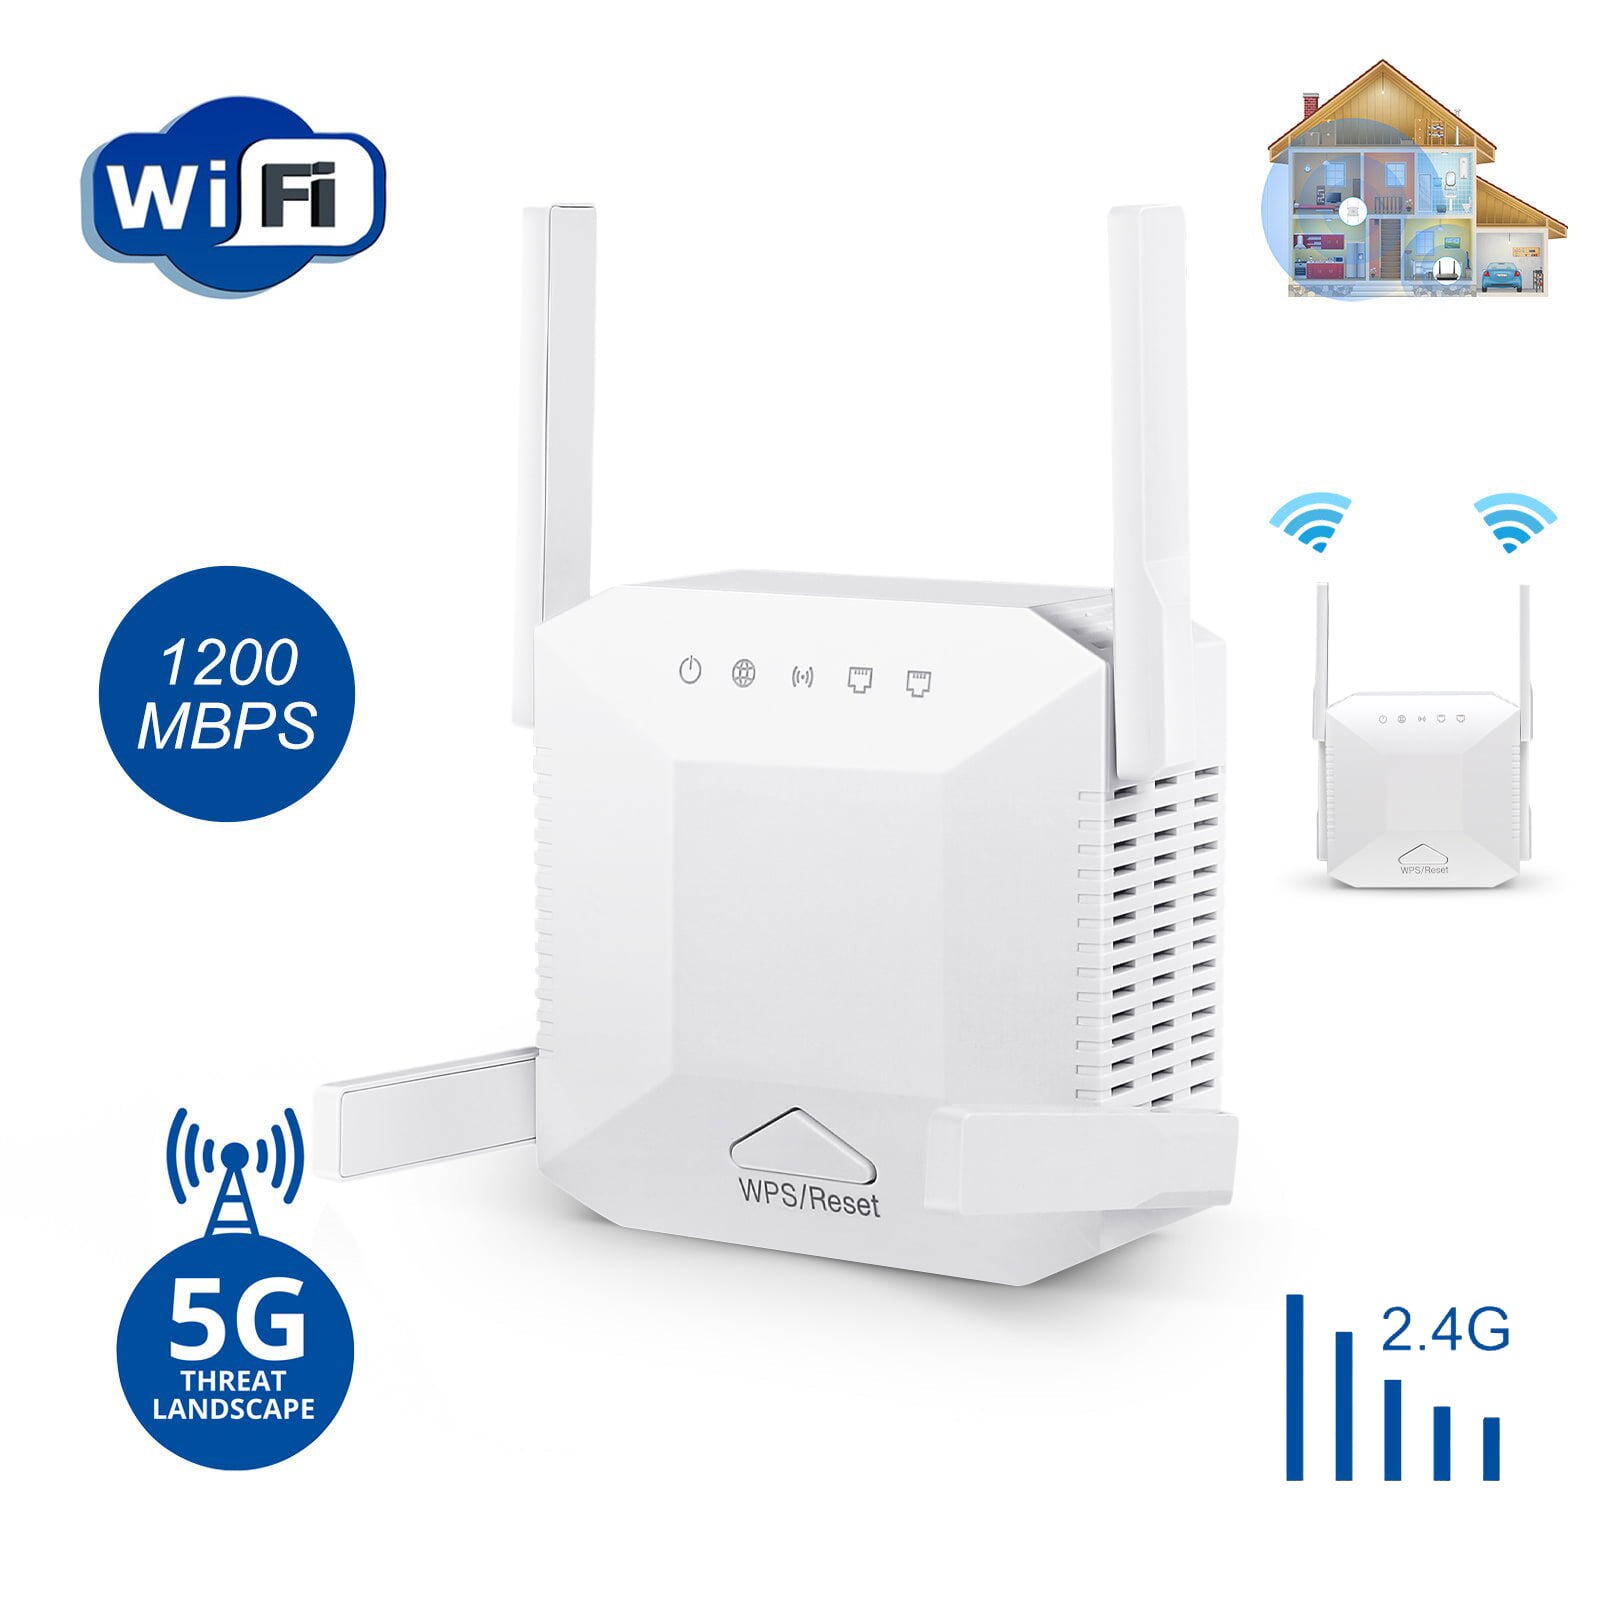 renhed Rådgiver Hav iFanze WiFi Extender, Up to 1200Mbps Speed, Covers Up to 1300 Sq.ft, D